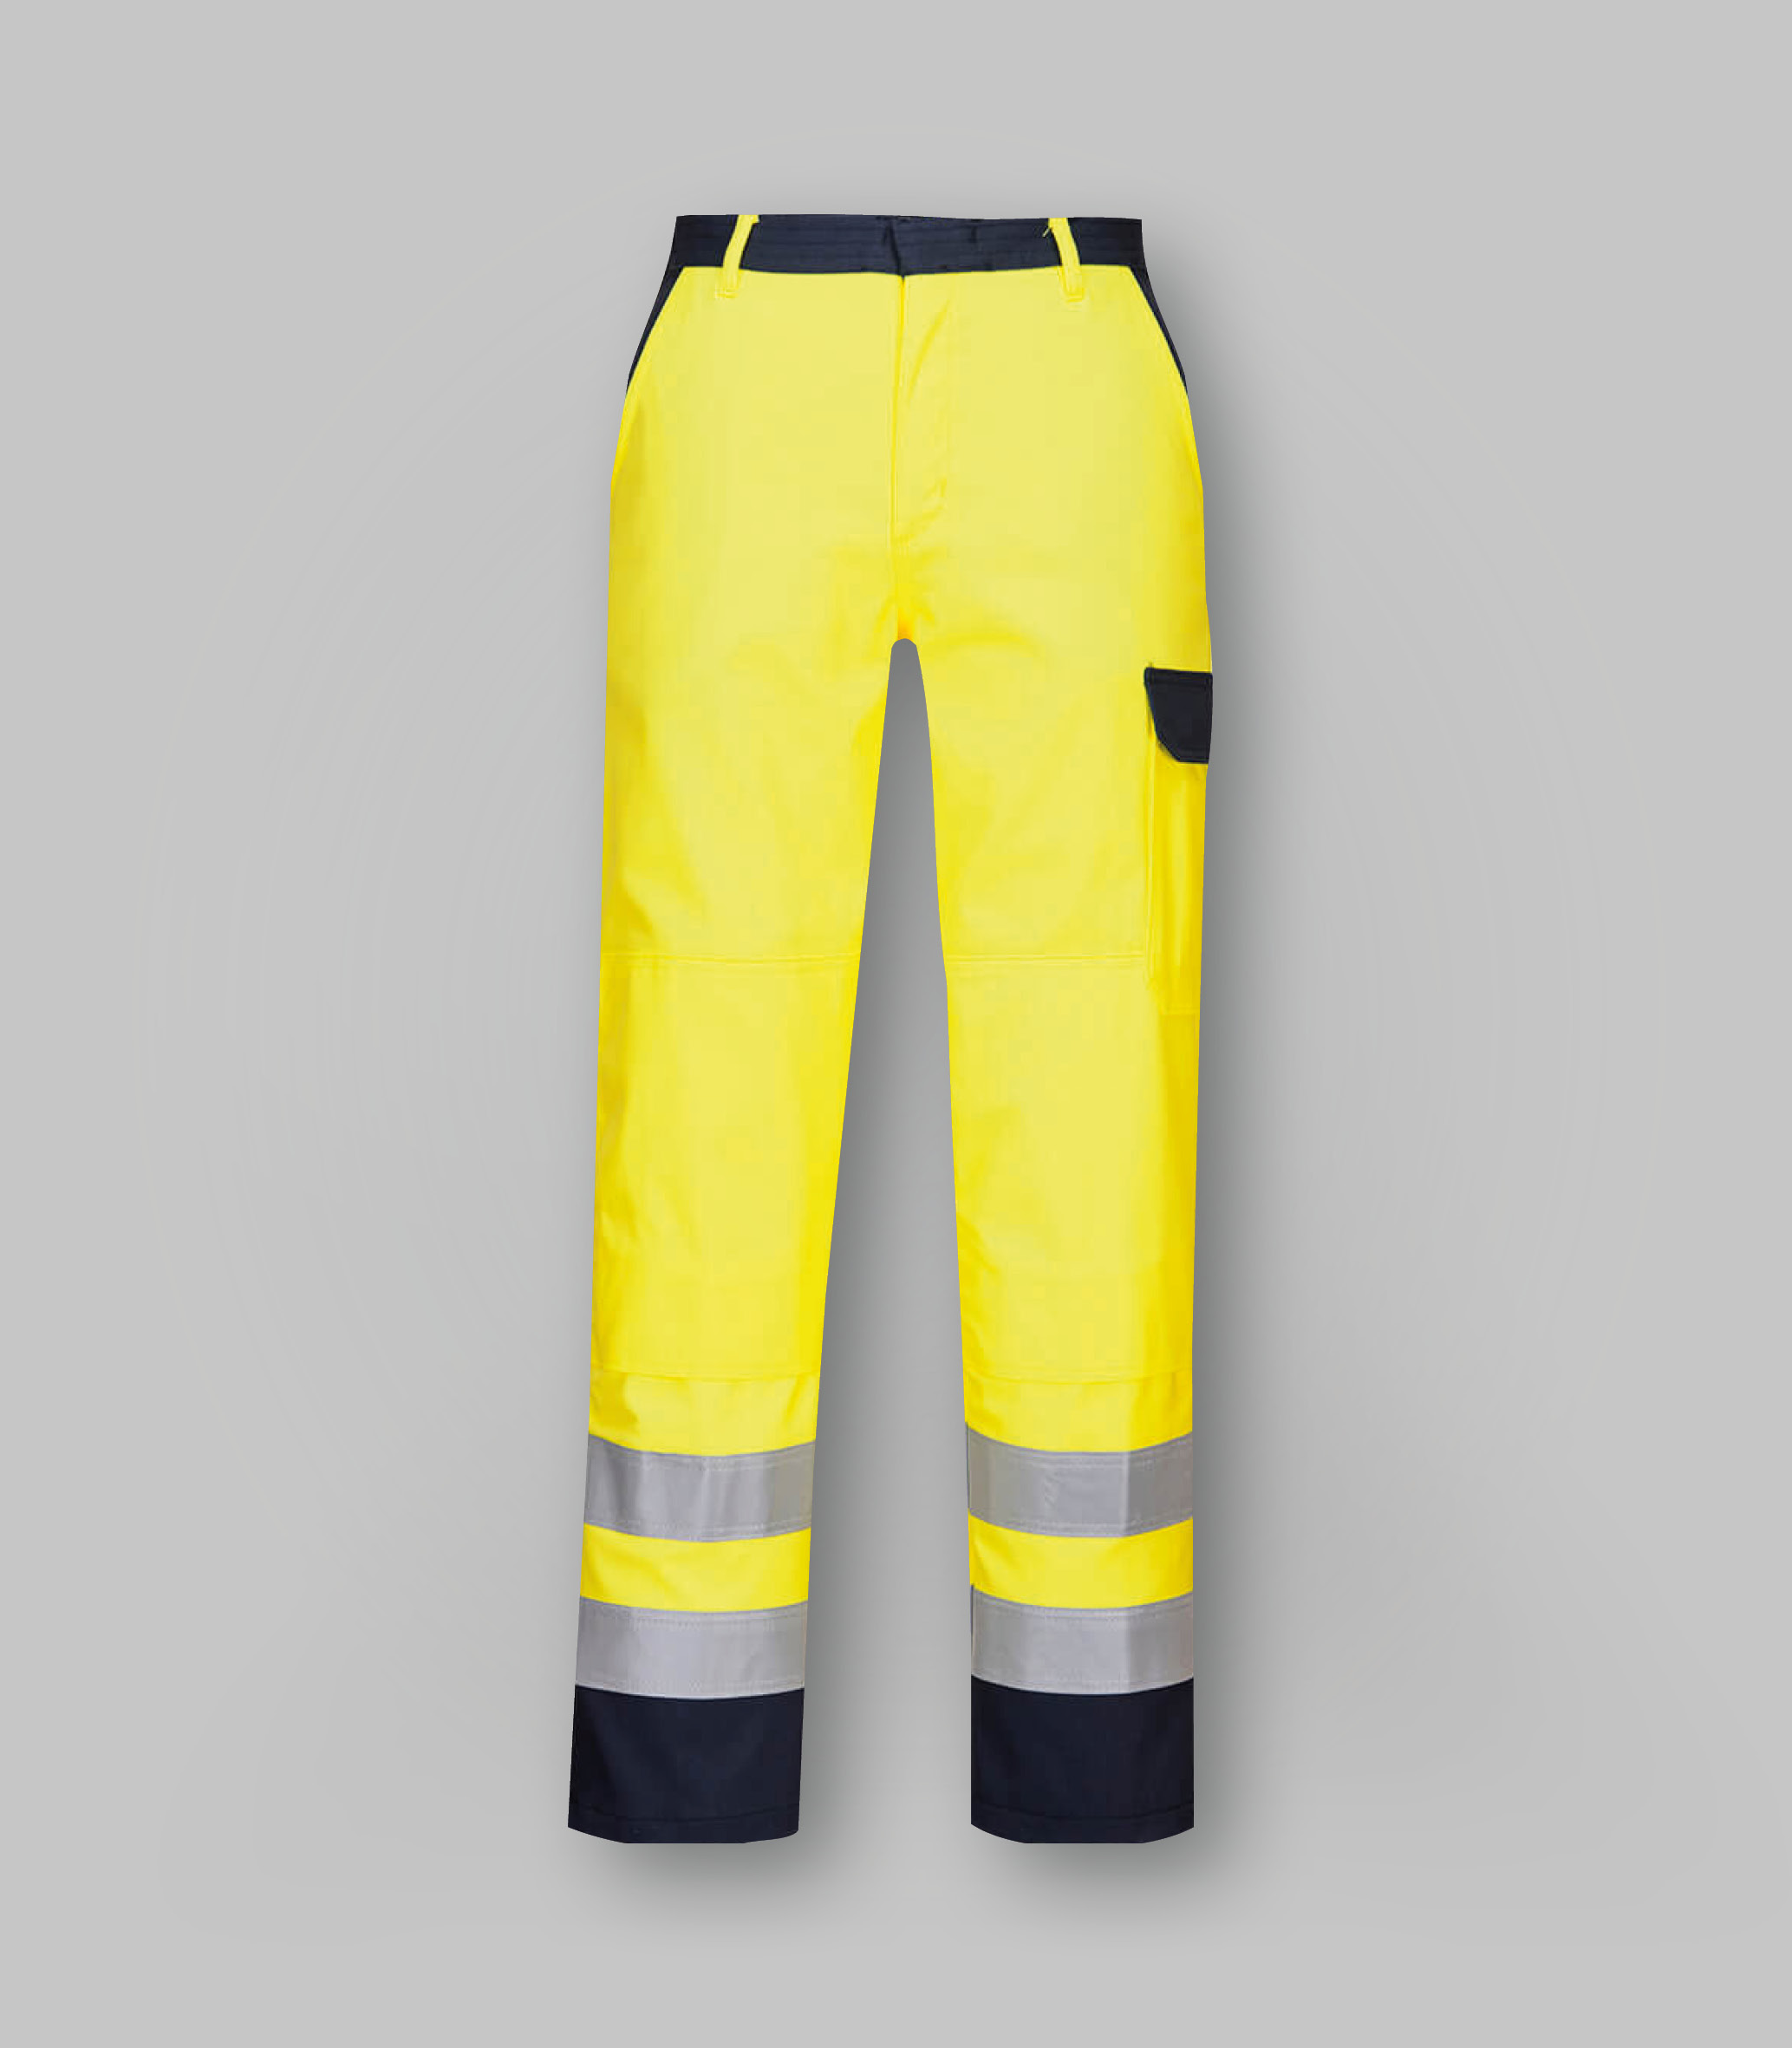 Two-tone High Visibility Trousers